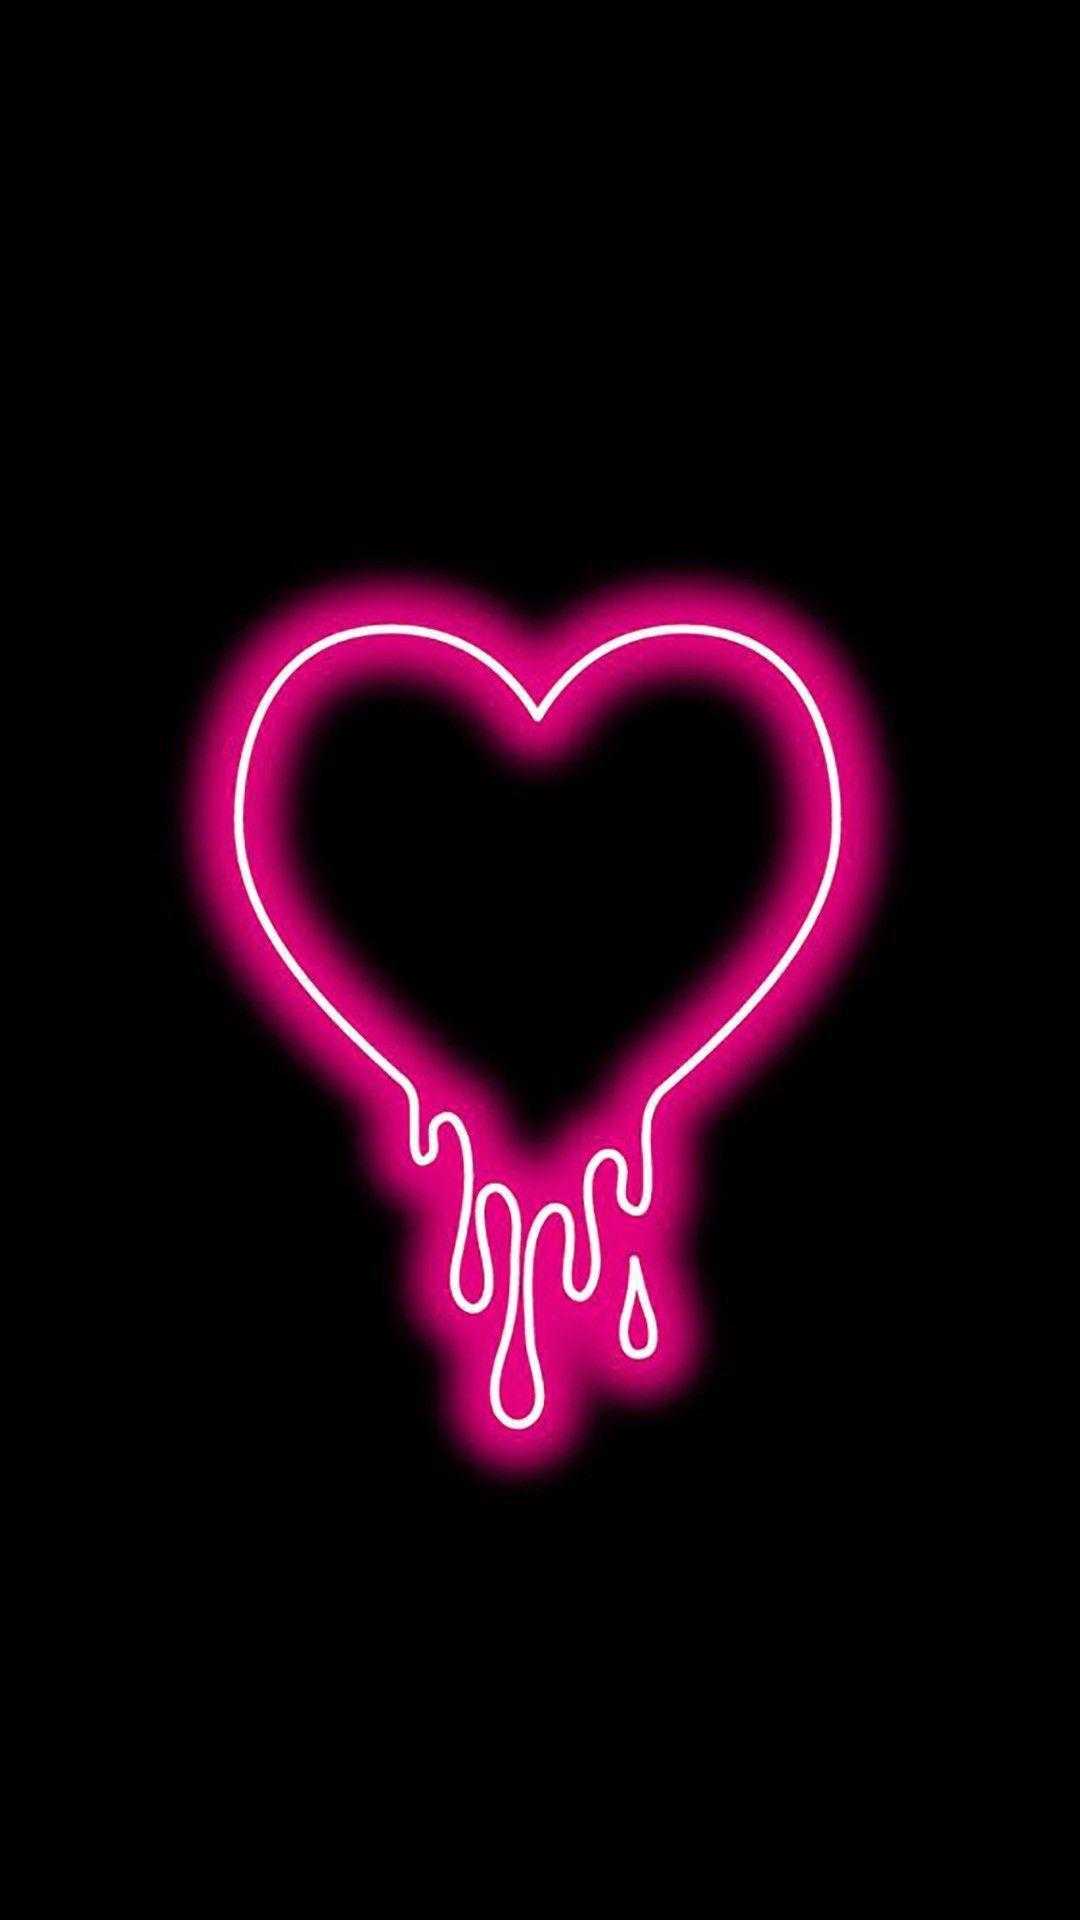 Neon Heart iPhone Wallpaper with high-resolution 1080x1920 pixel. You can use this wallpaper for your iPhone 5, 6, 7, 8, X, XS, XR backgrounds, Mobile Screensaver, or iPad Lock Screen - Heart, pink heart